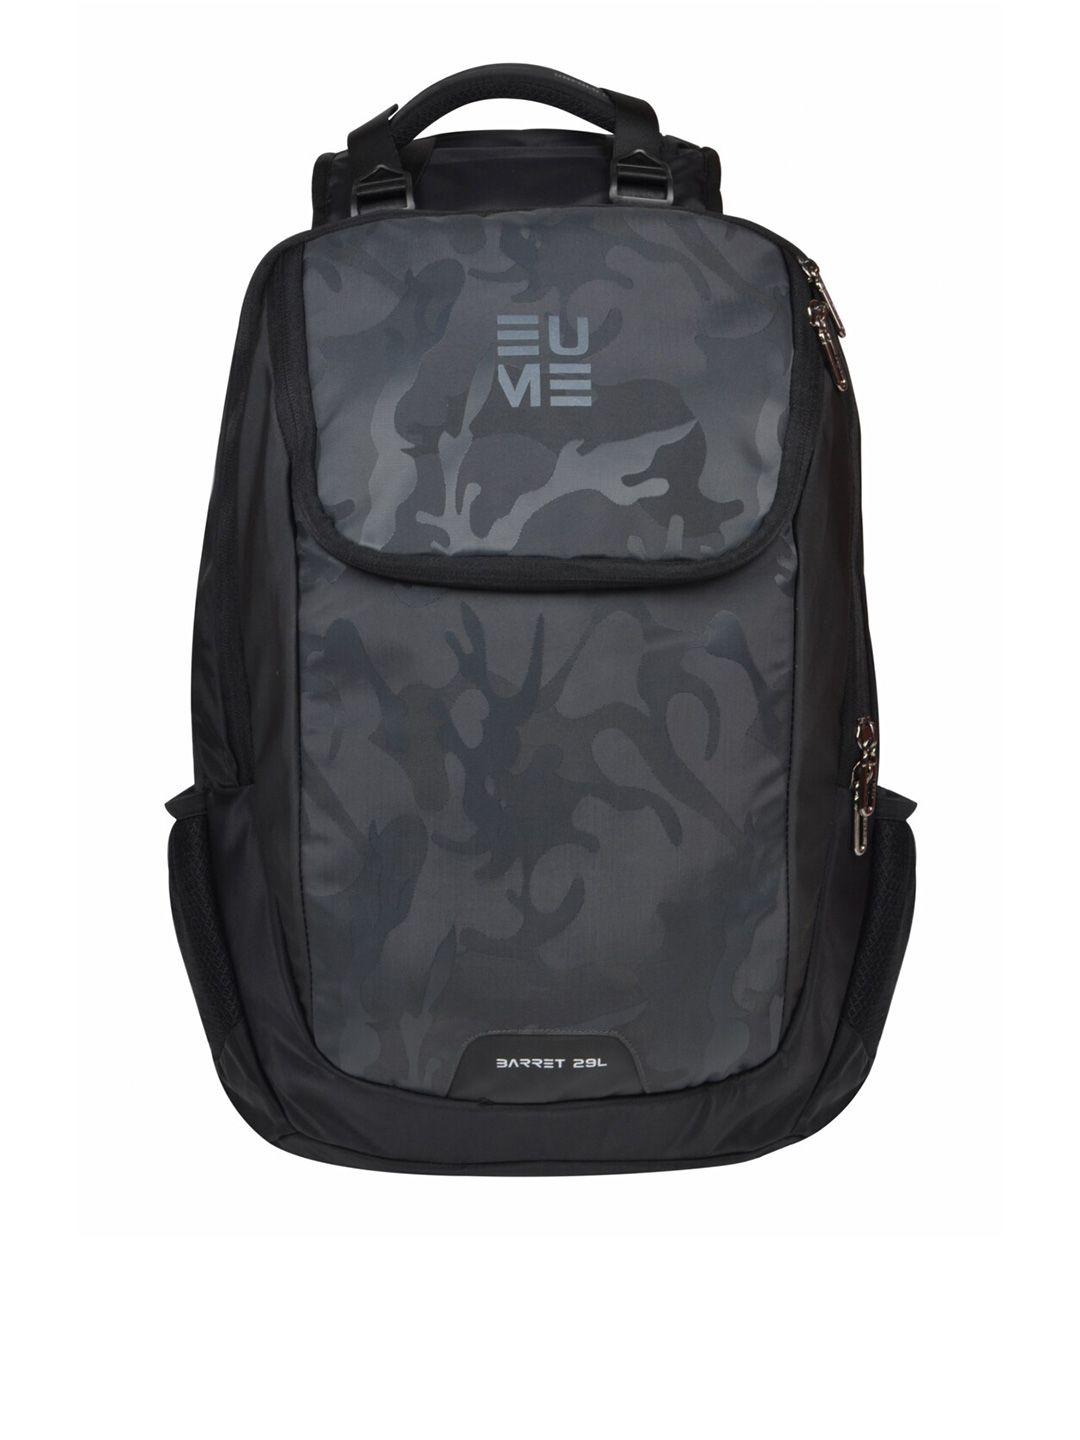 eume unisex grey & black camouflage laptop backpack with hip strap